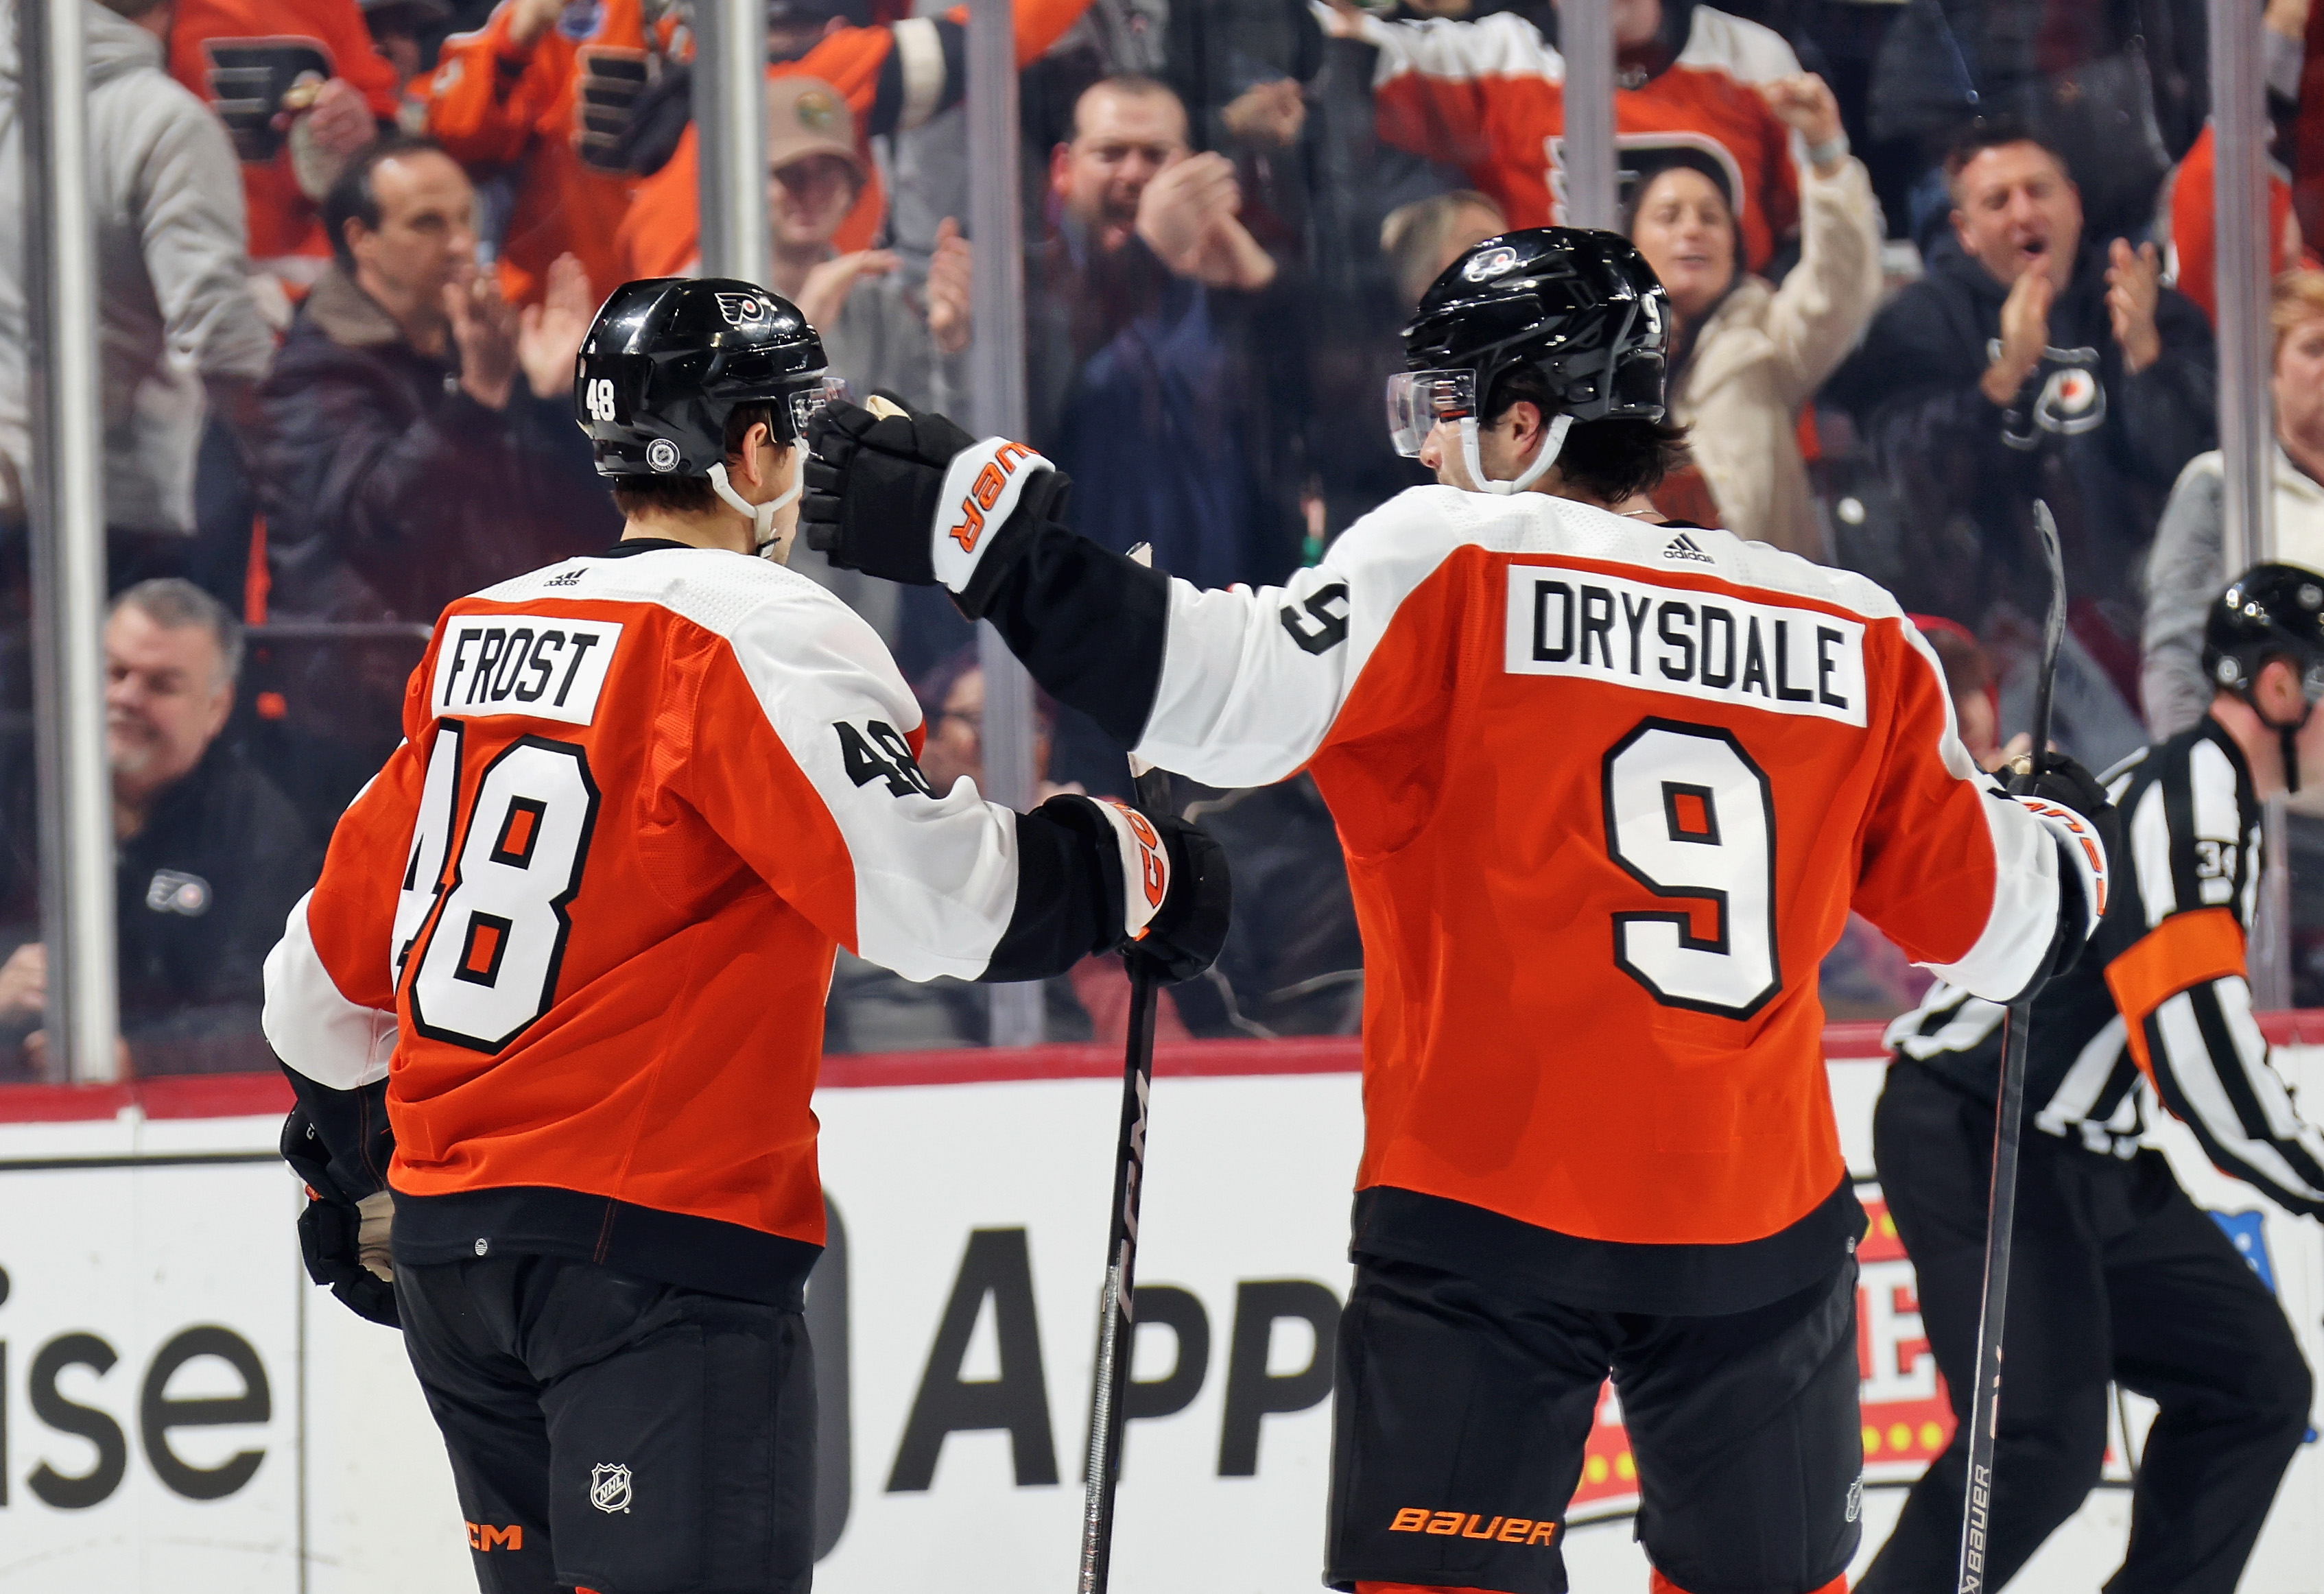 The Flyers Past and the Bright Orange Future